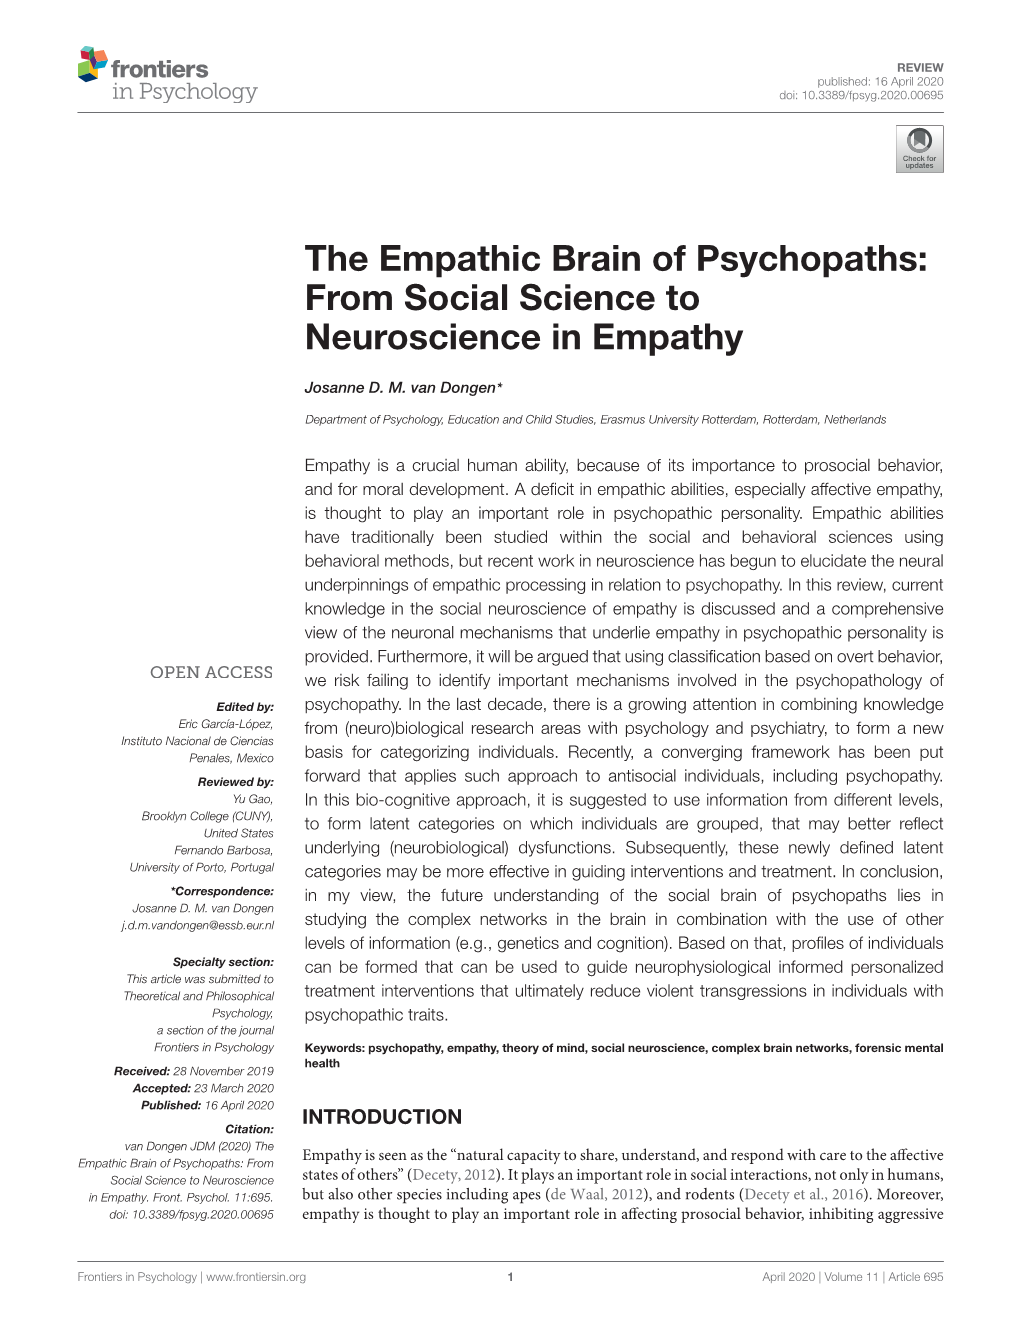 The Empathic Brain of Psychopaths: from Social Science to Neuroscience in Empathy